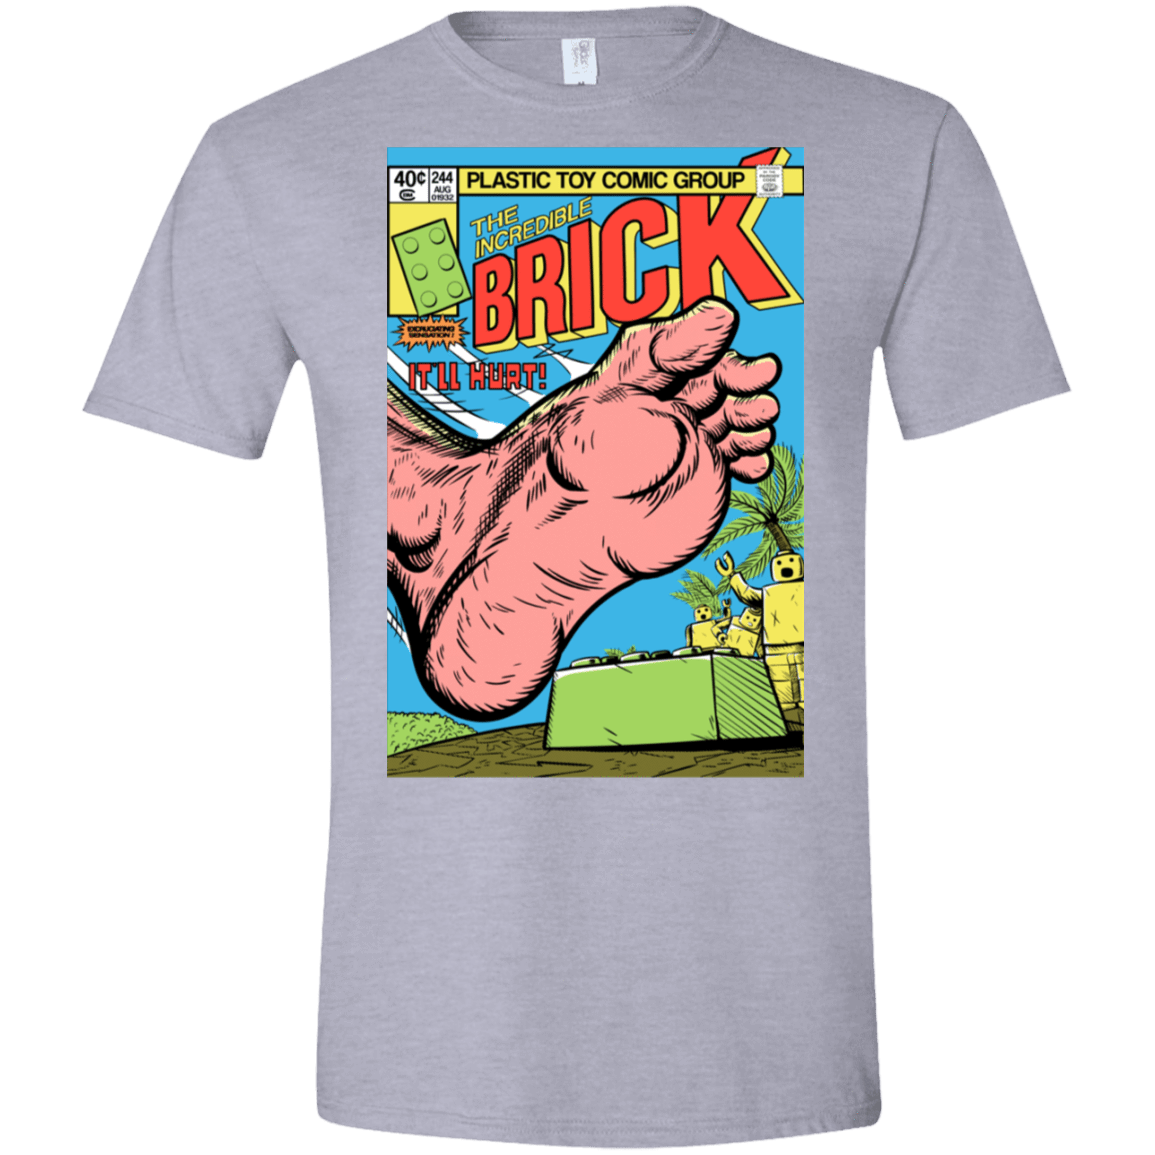 T-Shirts Sport Grey / X-Small The Incredible Brick Men's Semi-Fitted Softstyle